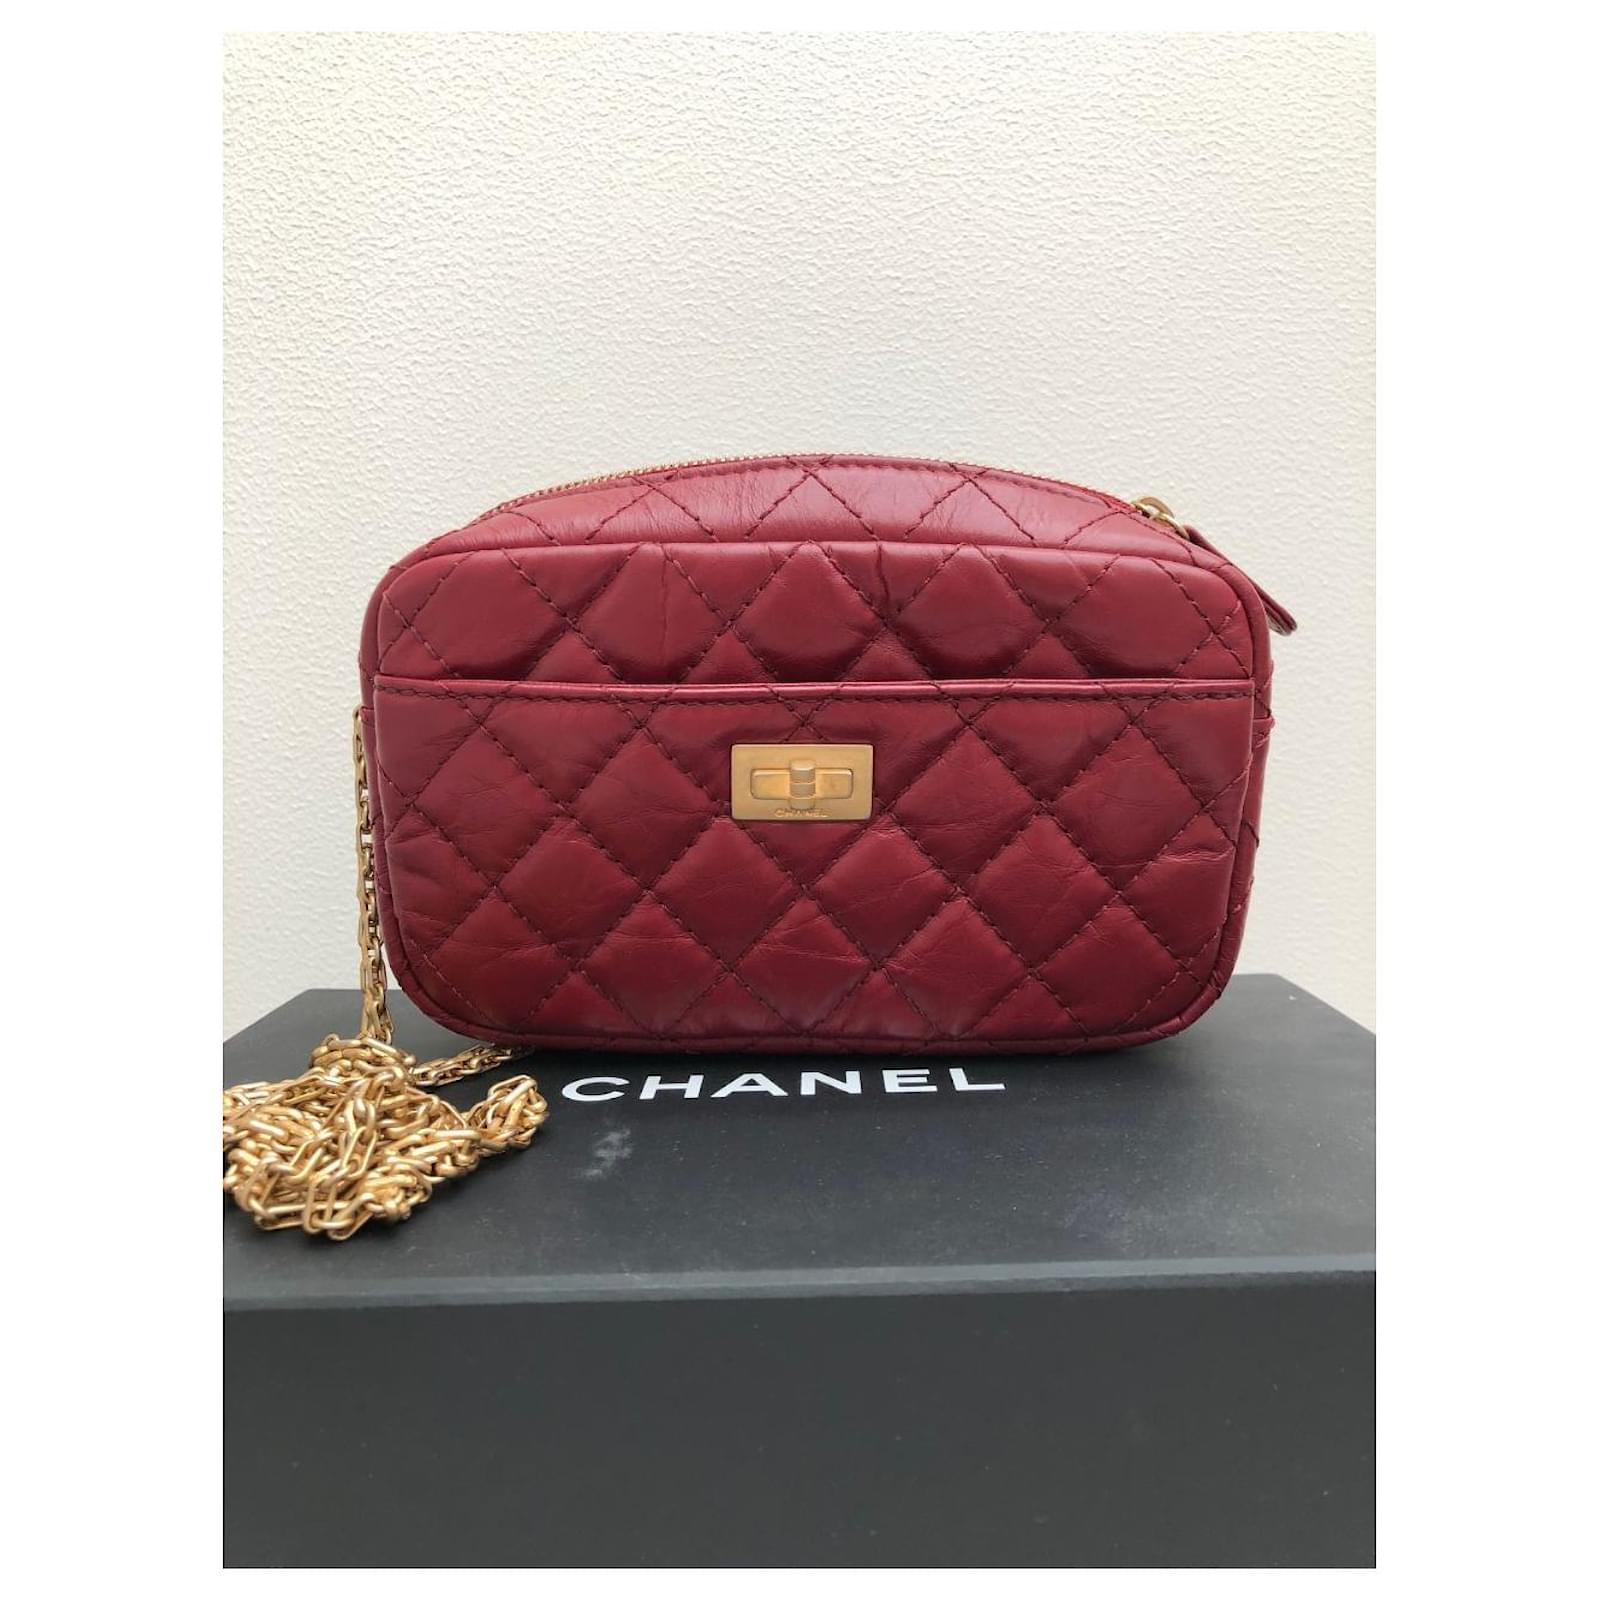 CHANEL, Bags, New Chanel Pink Heart Bag 22s